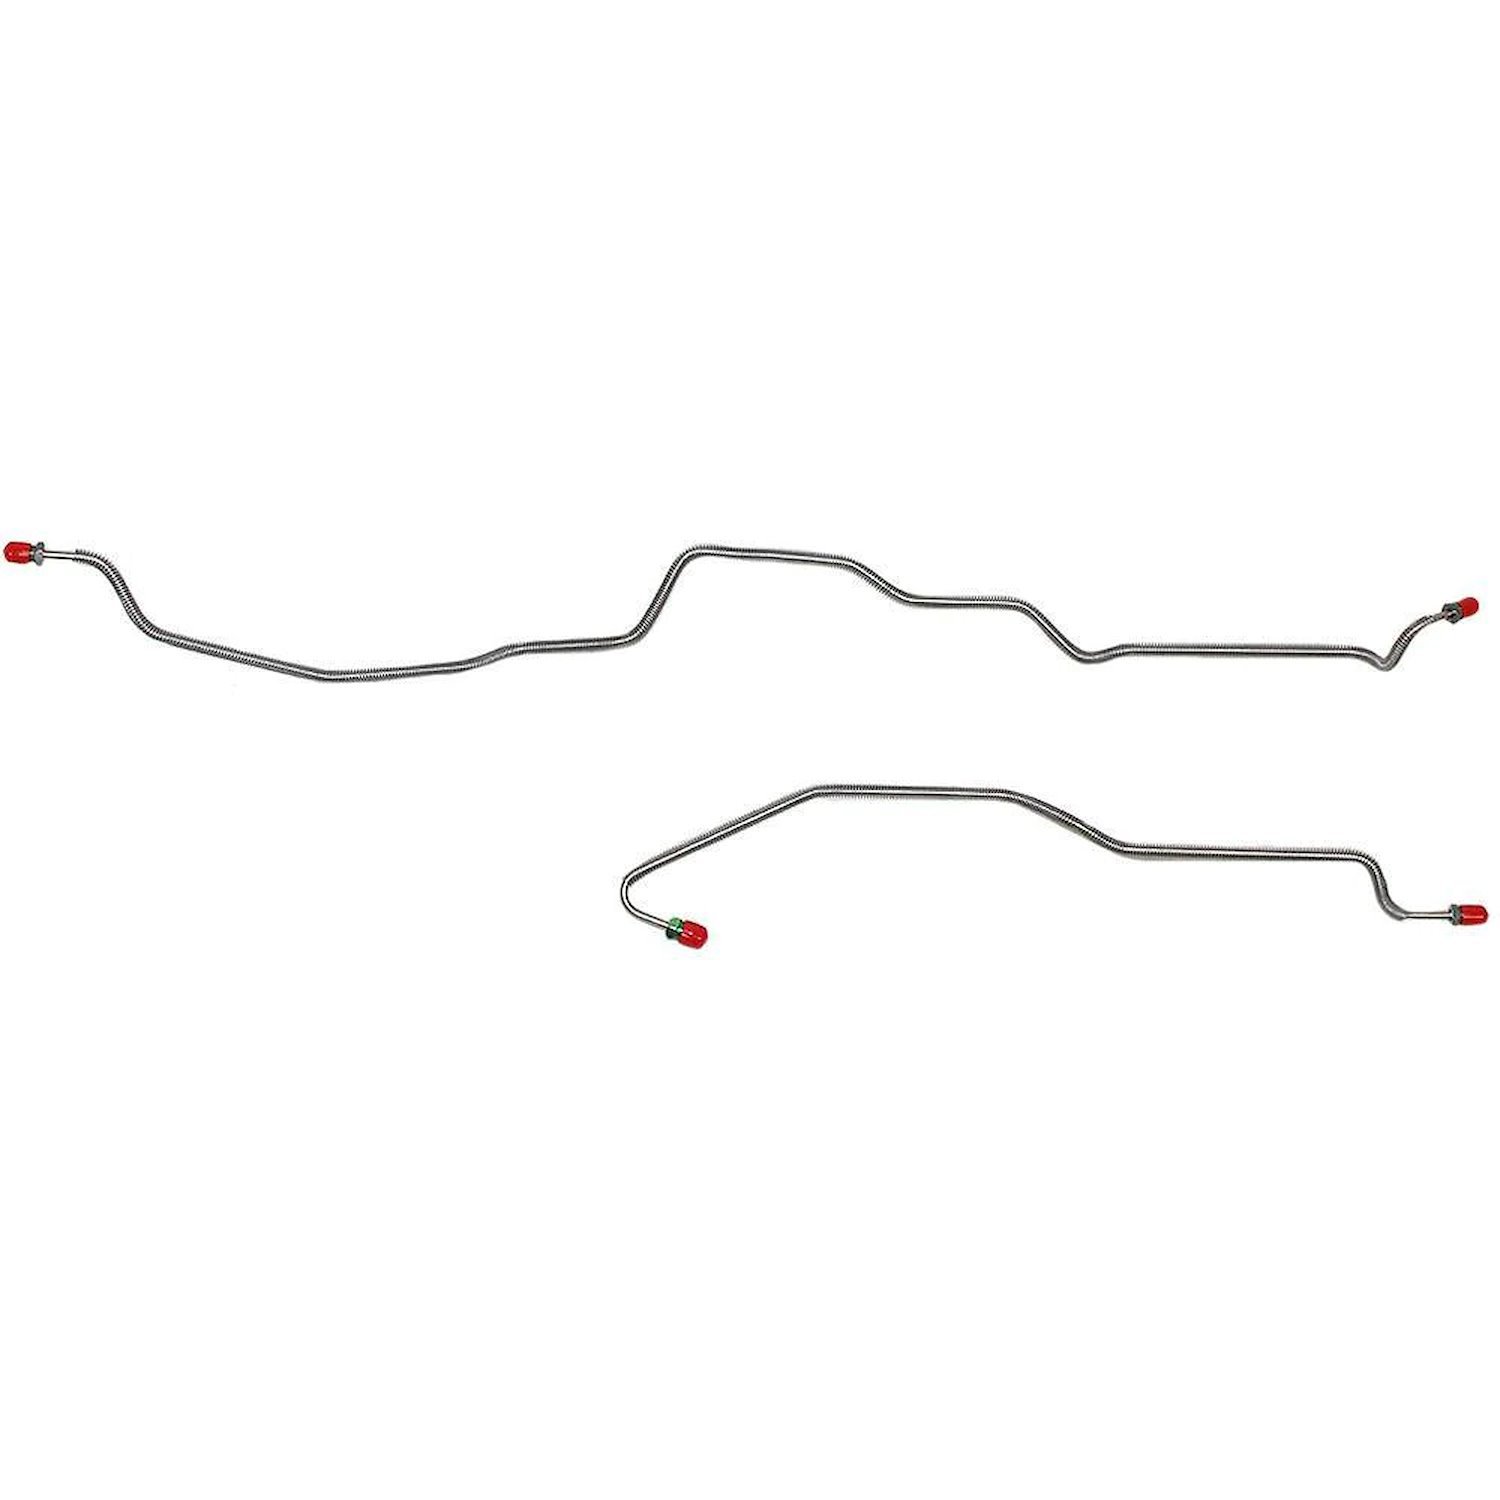 Rear Axle Brake Line Set for 1995-1997 Chevy Camaro, Pontiac Trans Am without Traction Control [2-PC, Stainless Steel]